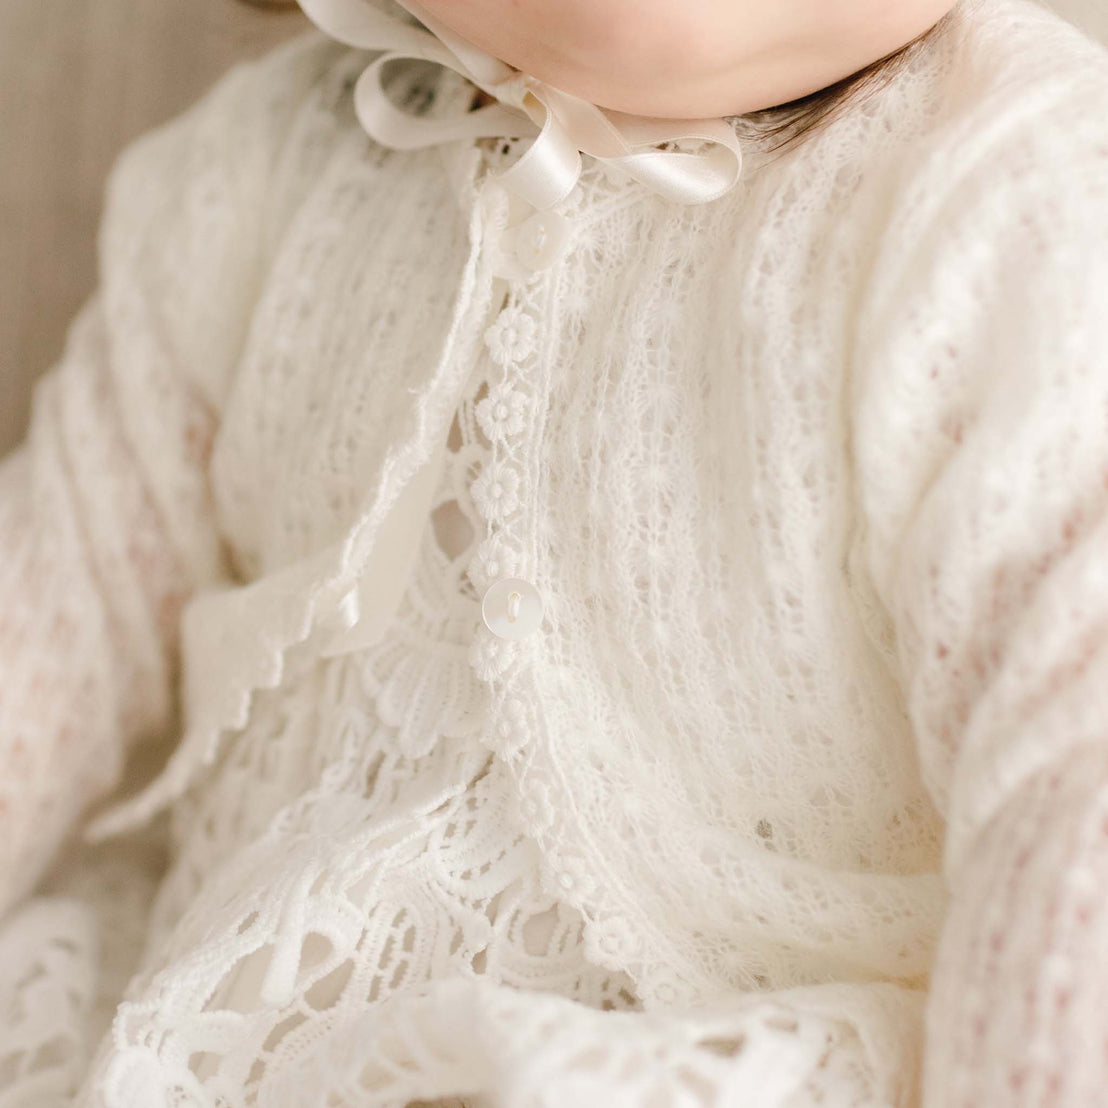 Detail of the Lola Knit Sweater. Baby girl wearing the Lola Knit Sweater that matches the Lola Christening Gown, Dress and Romper. Made of 100% ivory knit acrylic in light ivory, a soft and breathable knit with button closures and light ivory trim.